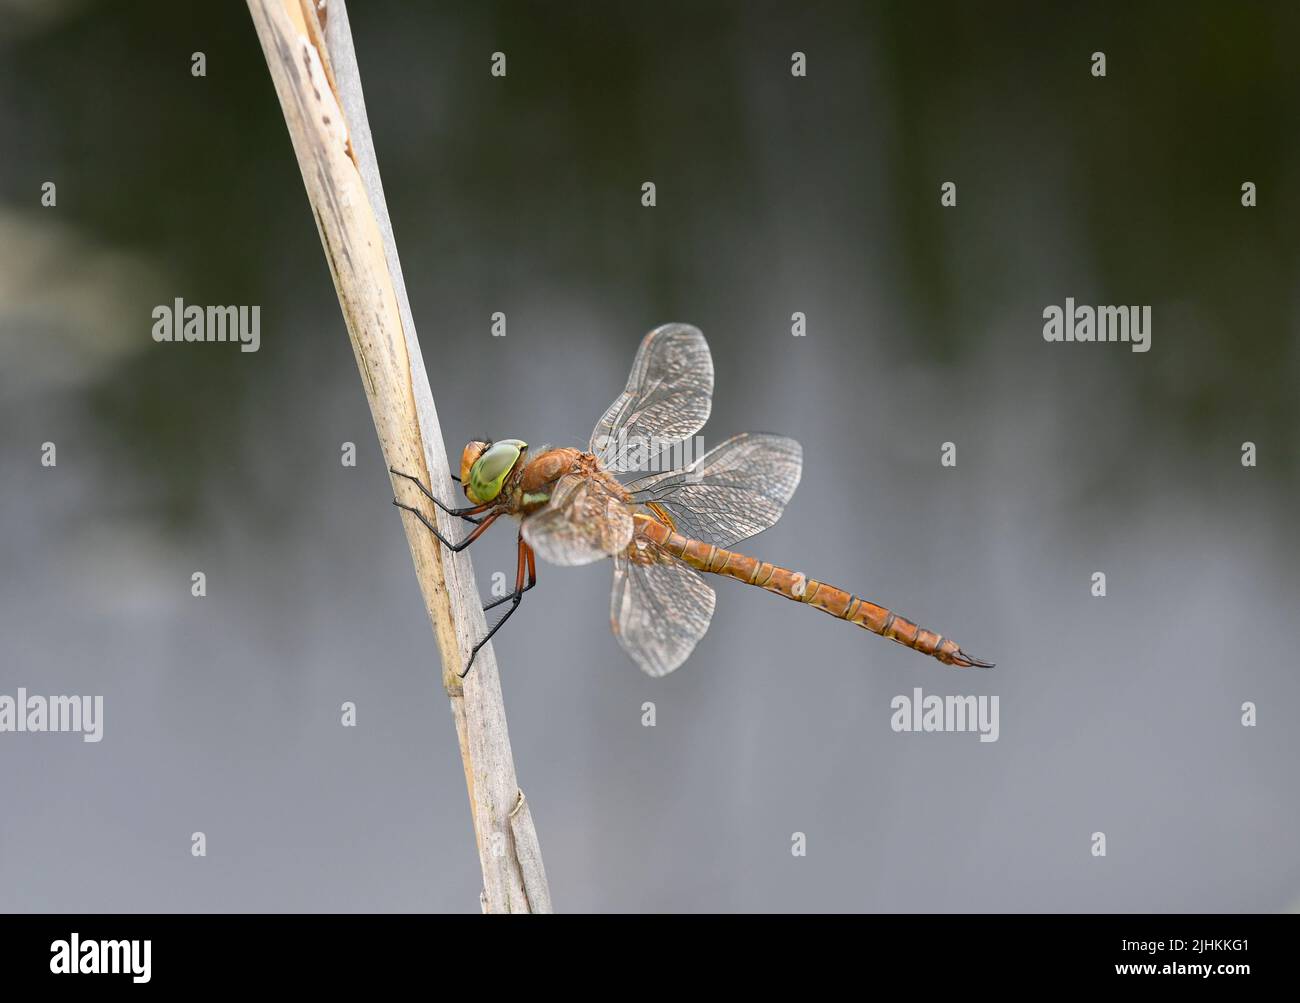 Norfolk Hawker Dragonfly (Aeshna isoceles) perched on reed stem, Norfolk, England, June Stock Photo